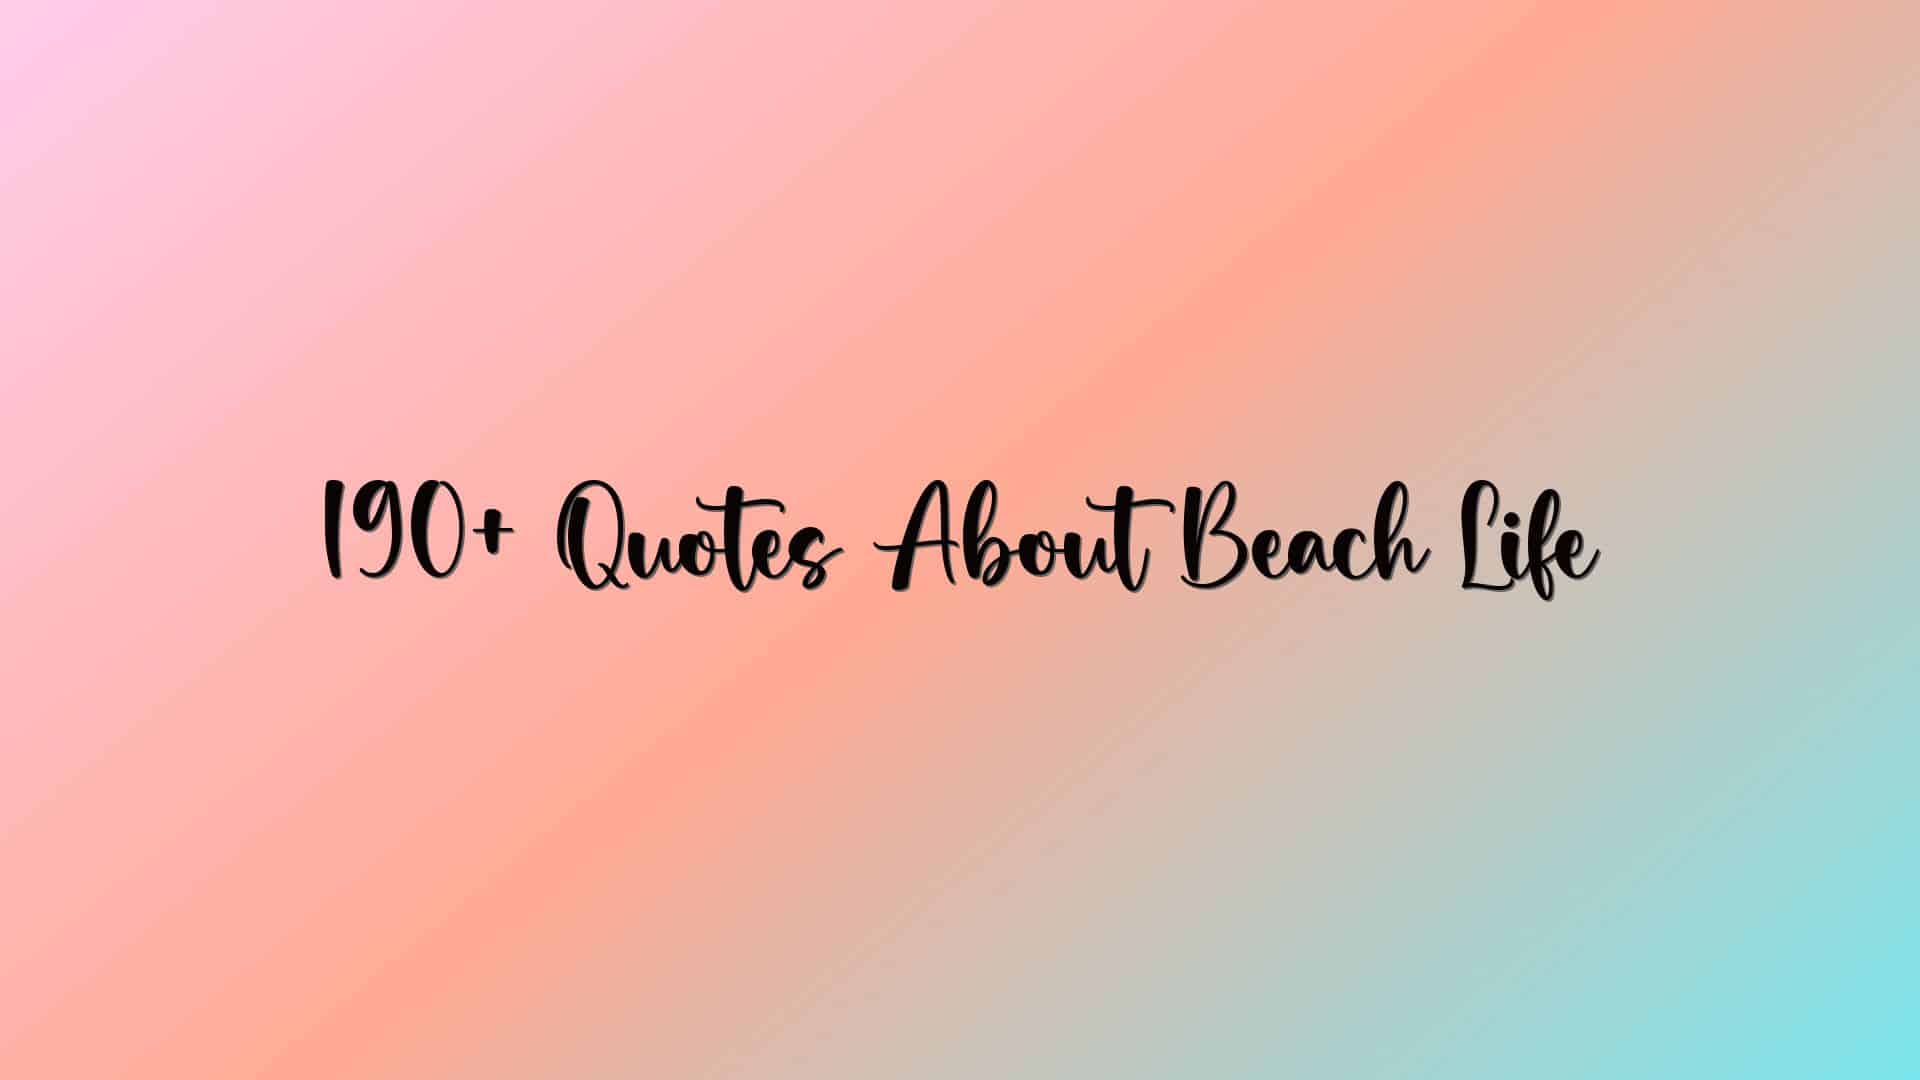 190+ Quotes About Beach Life